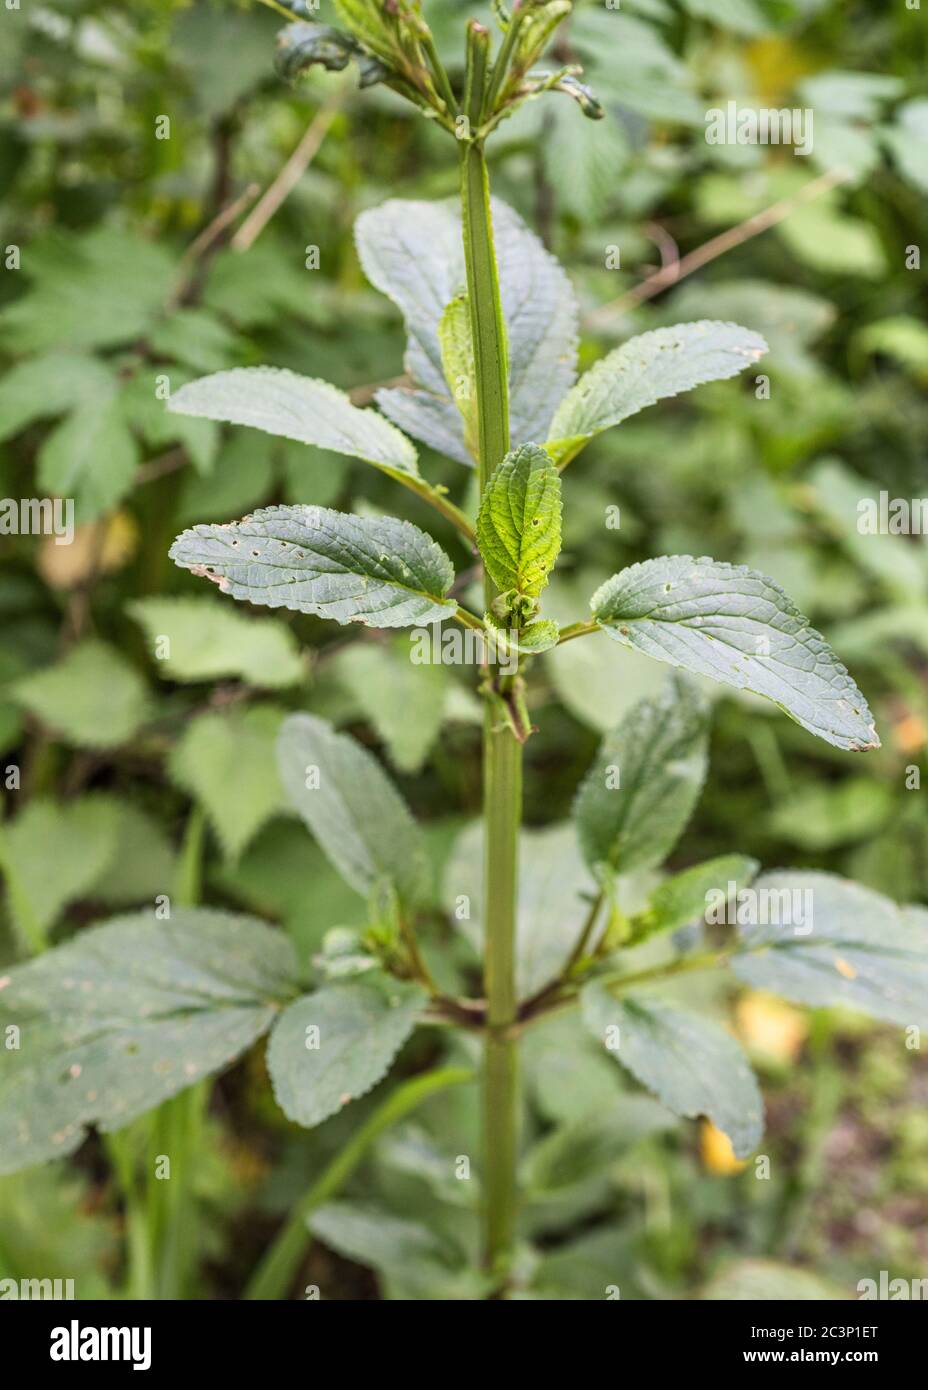 Winged square stem and leaves of Water Figwort / Scrophularia aquatica. Species likes wet and moist habitats. Medicinal plant used in herbal cures. Stock Photo